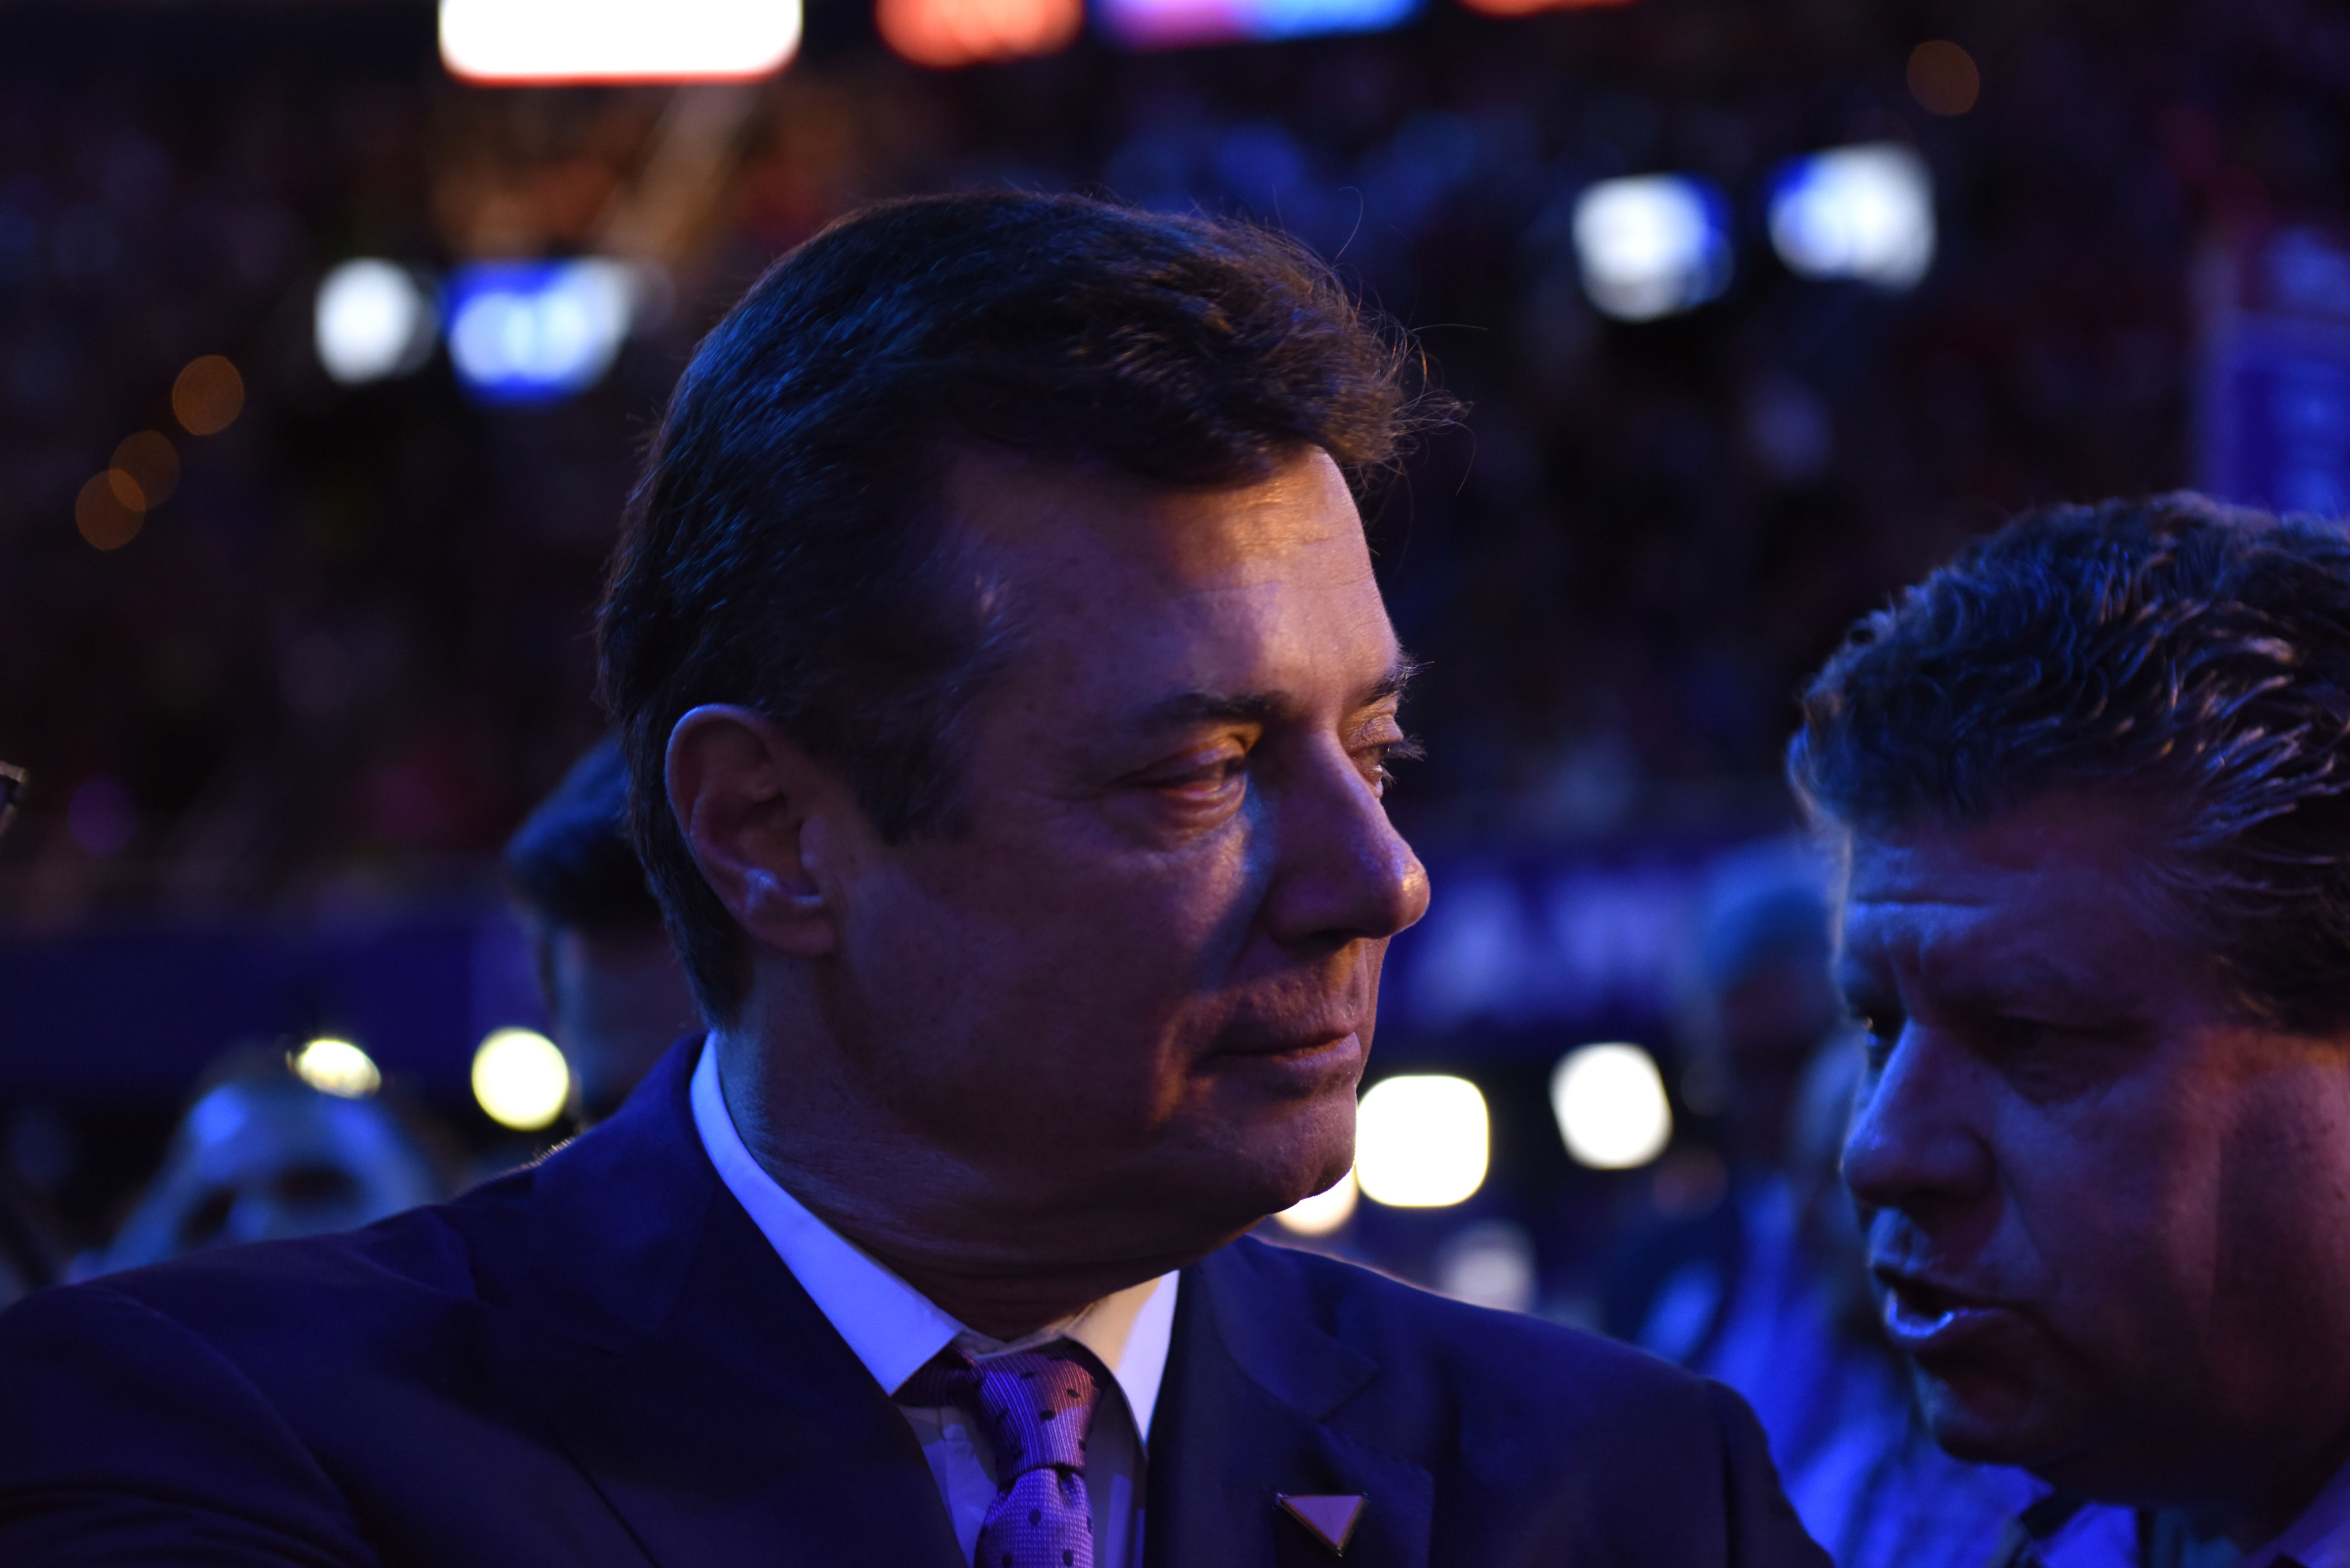 paul manafort, poised to rejoin trump world, aided chinese media deal